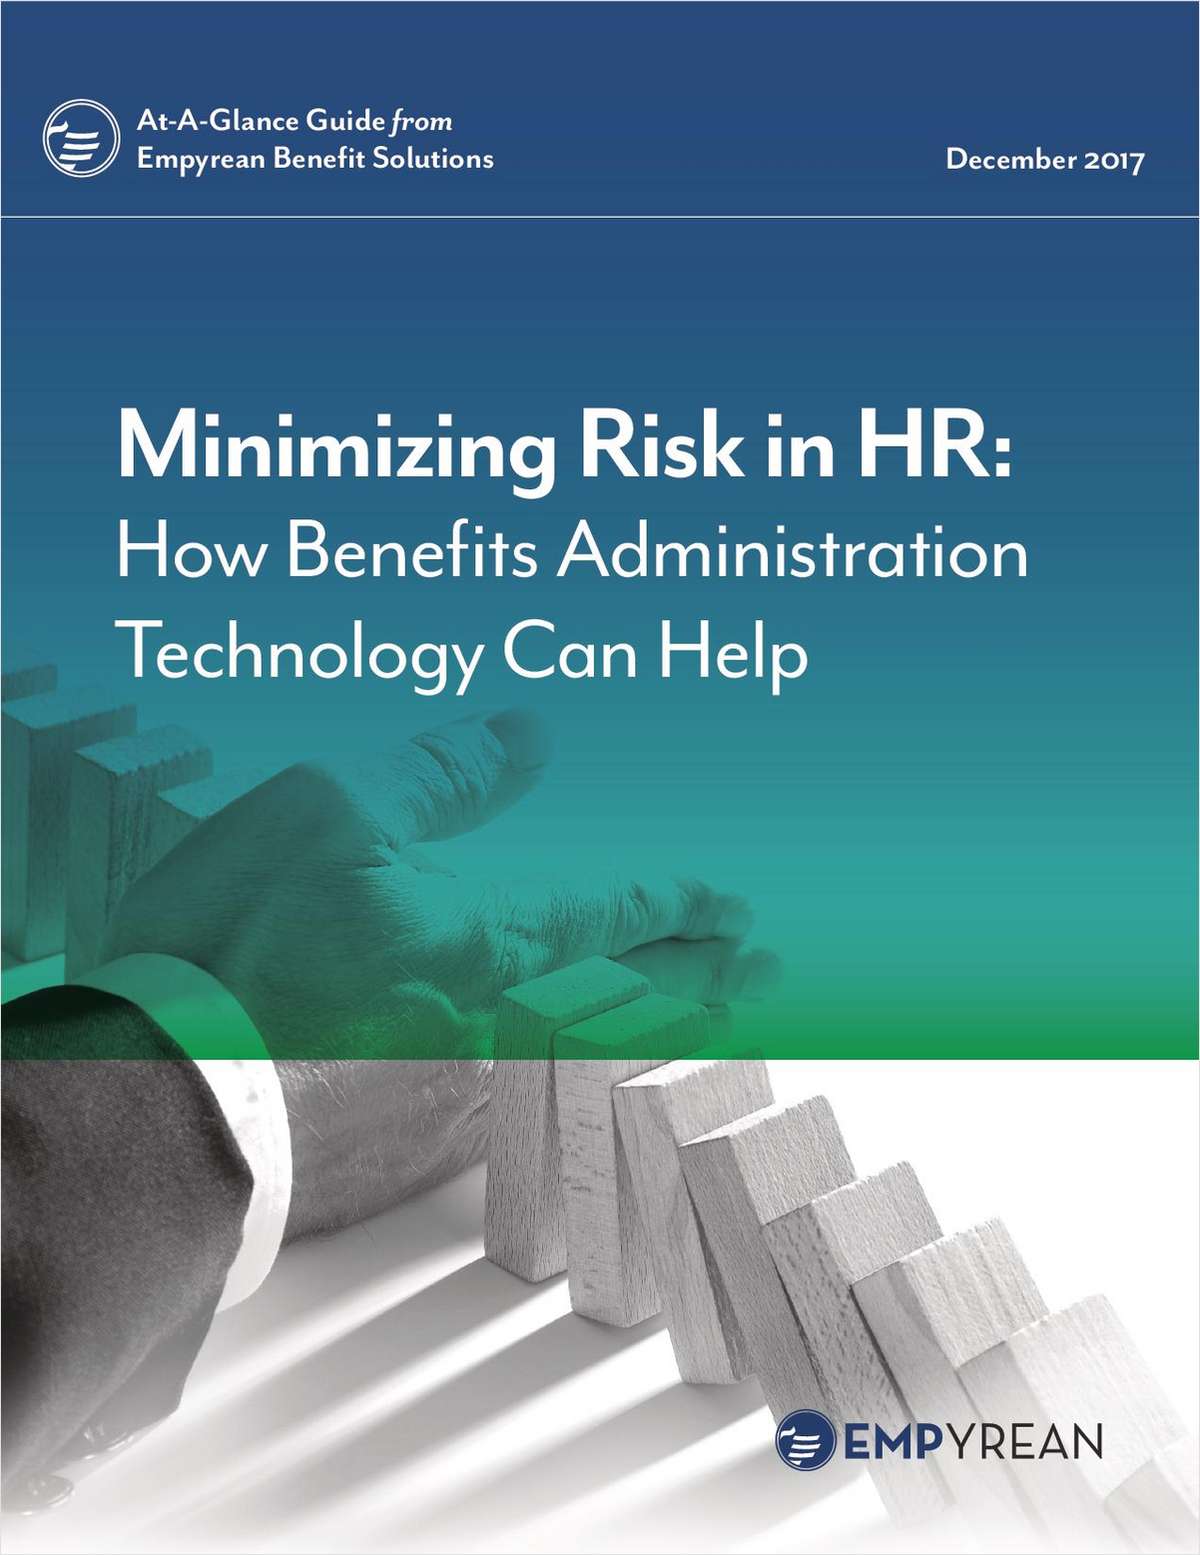 Minimizing Risk in HR: How Benefits Administration Technology Can Help